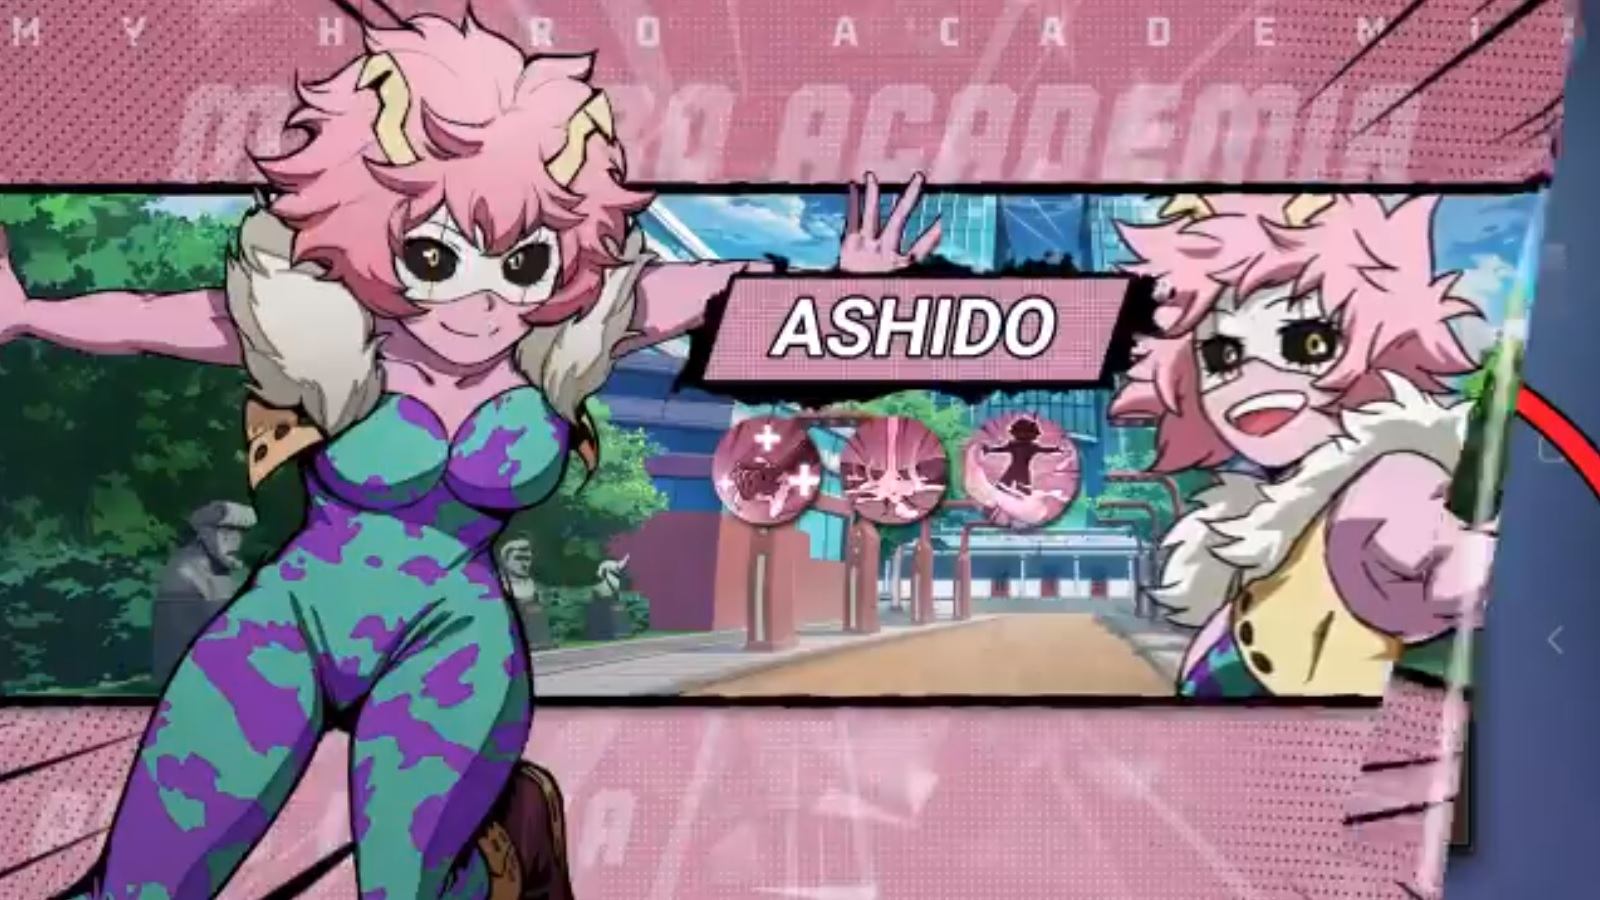 Pinky is Now Available in My Hero Academia: The Strongest Hero